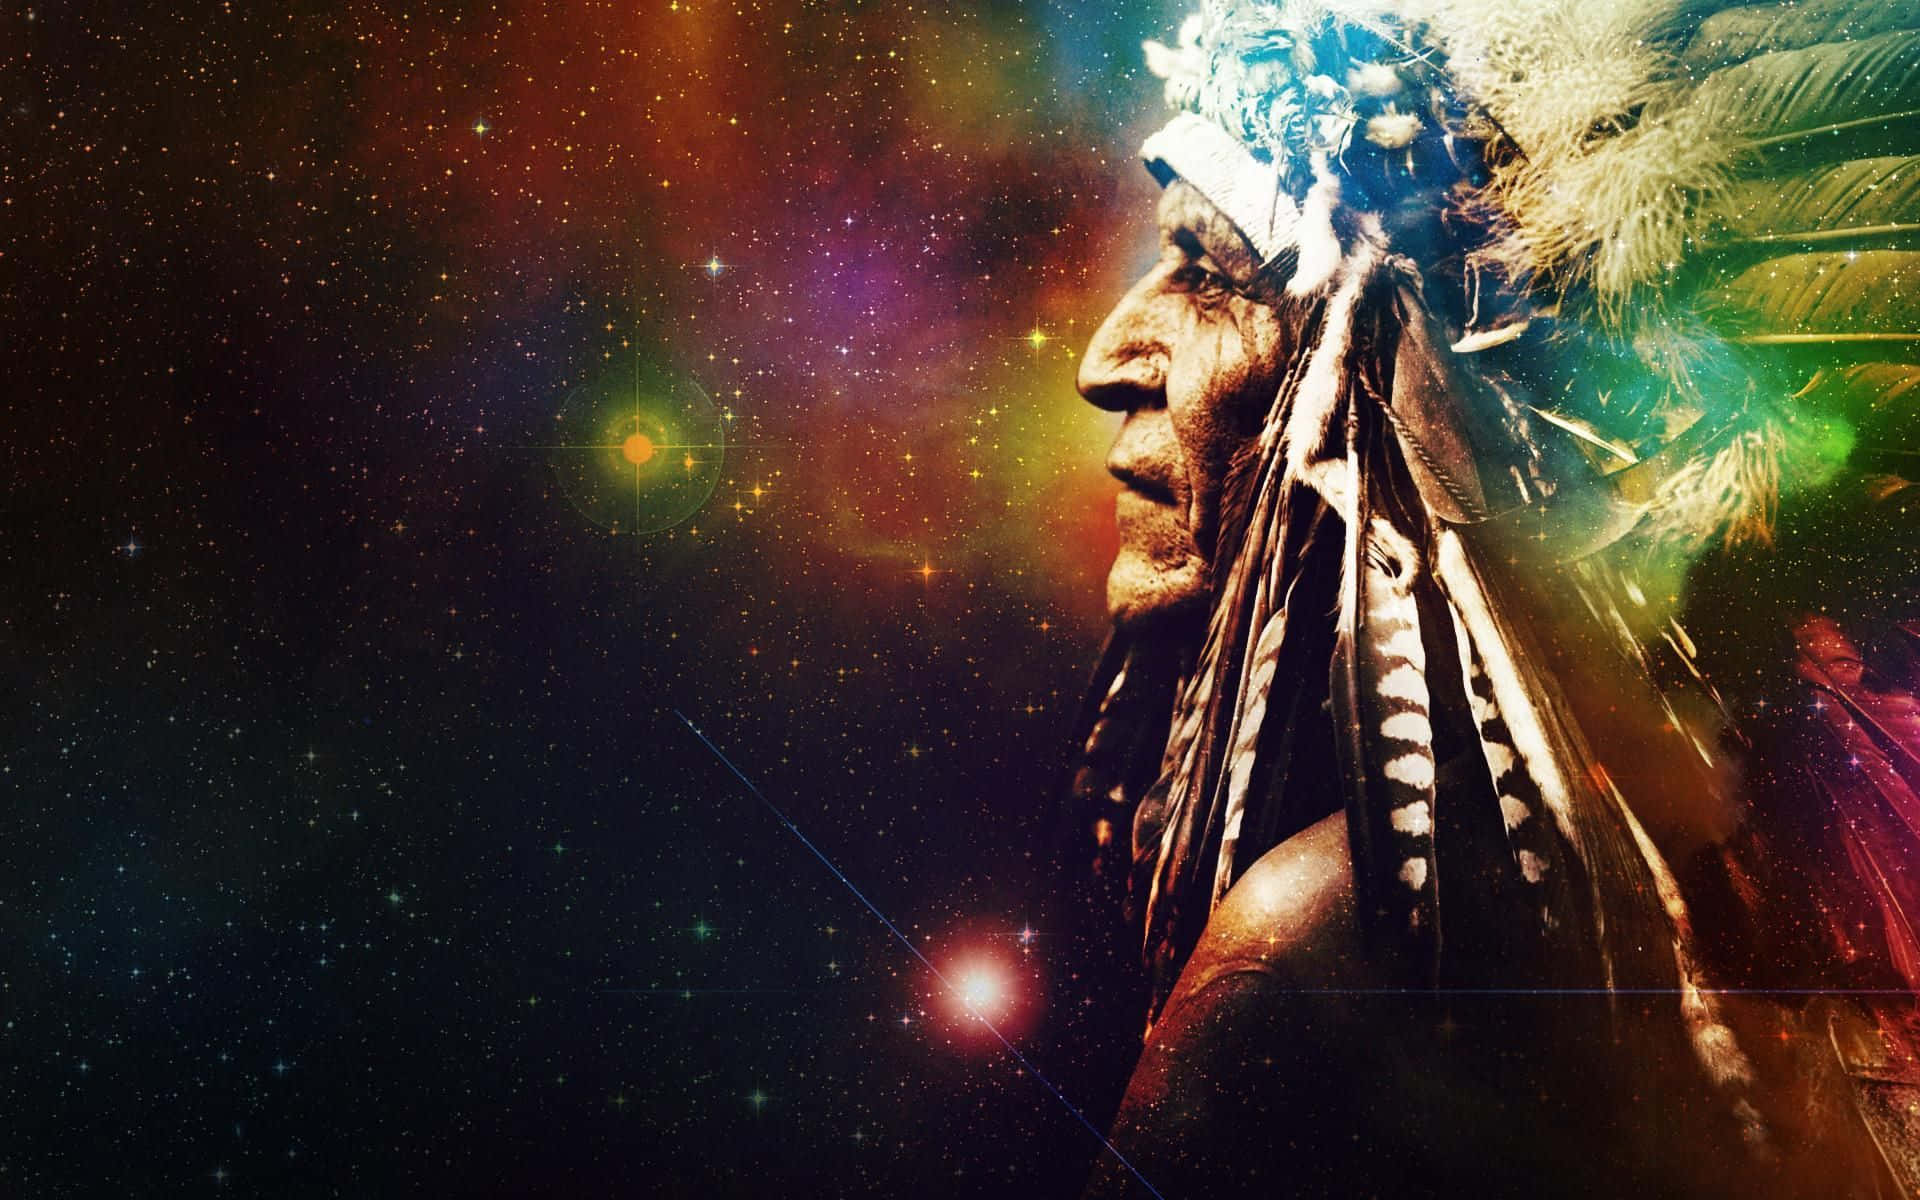 A Native American Indian reverentially pays homage to his homeland. Wallpaper